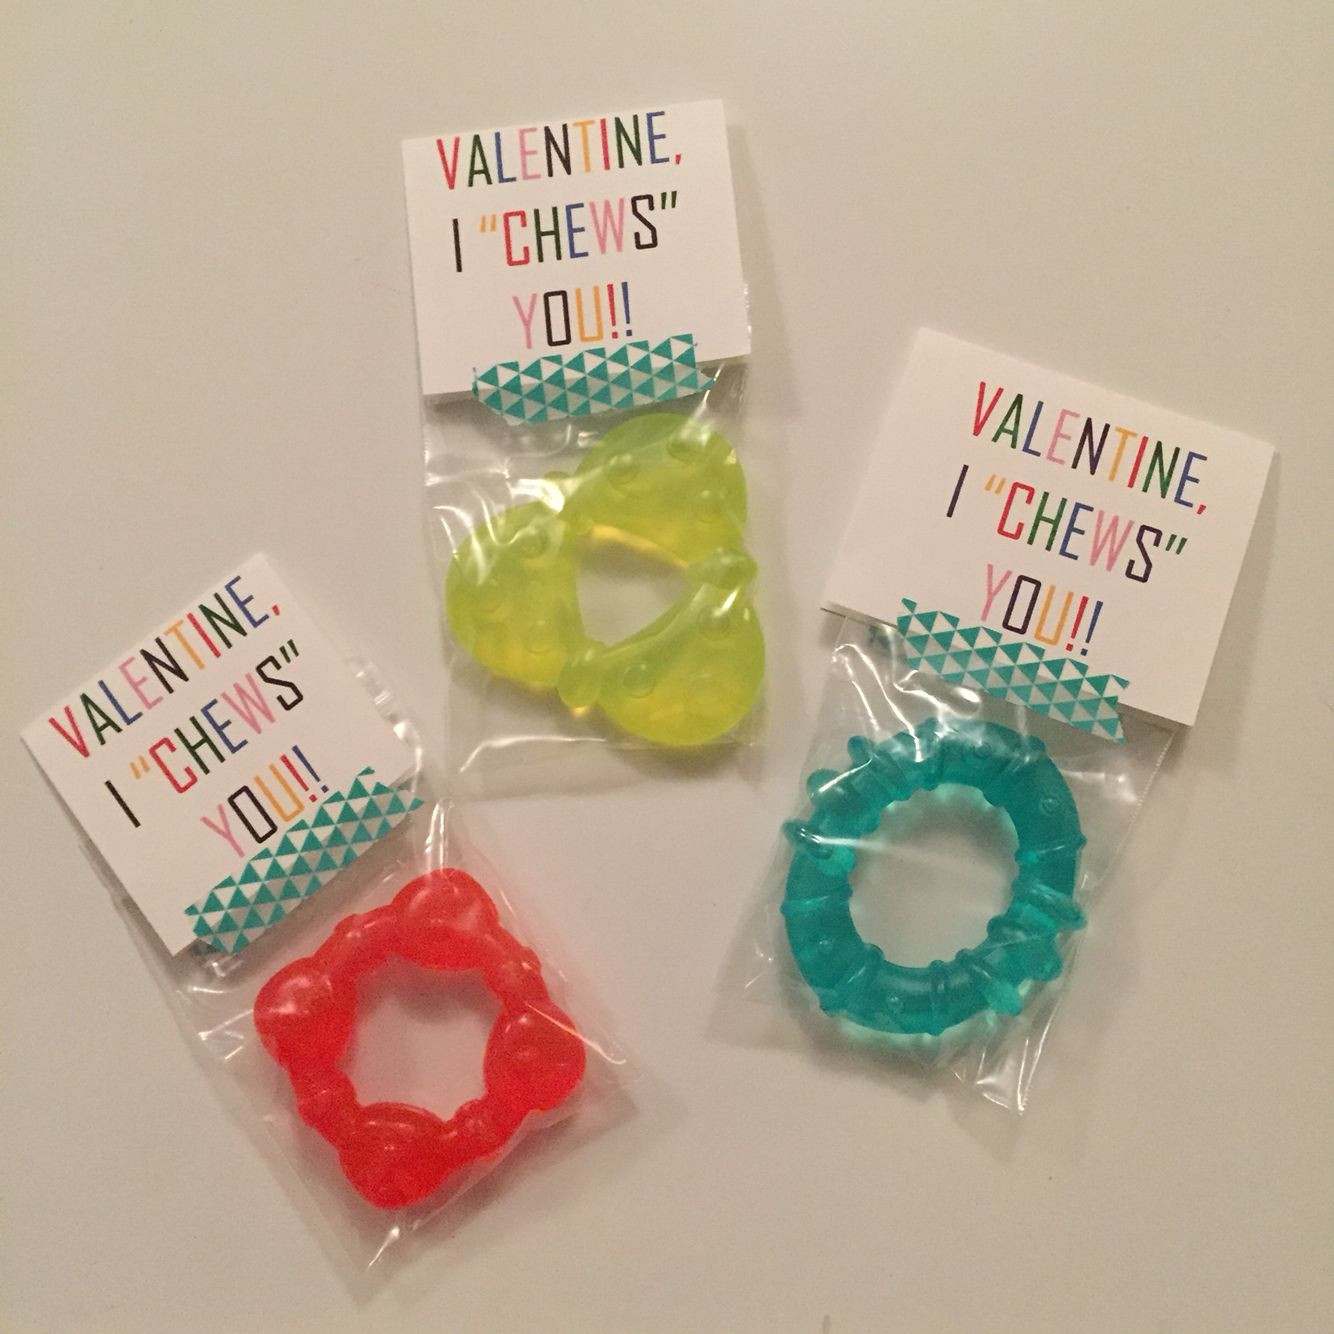 Valentine Gift Ideas For Infants
 Baby valentines using teethers I "chews" you